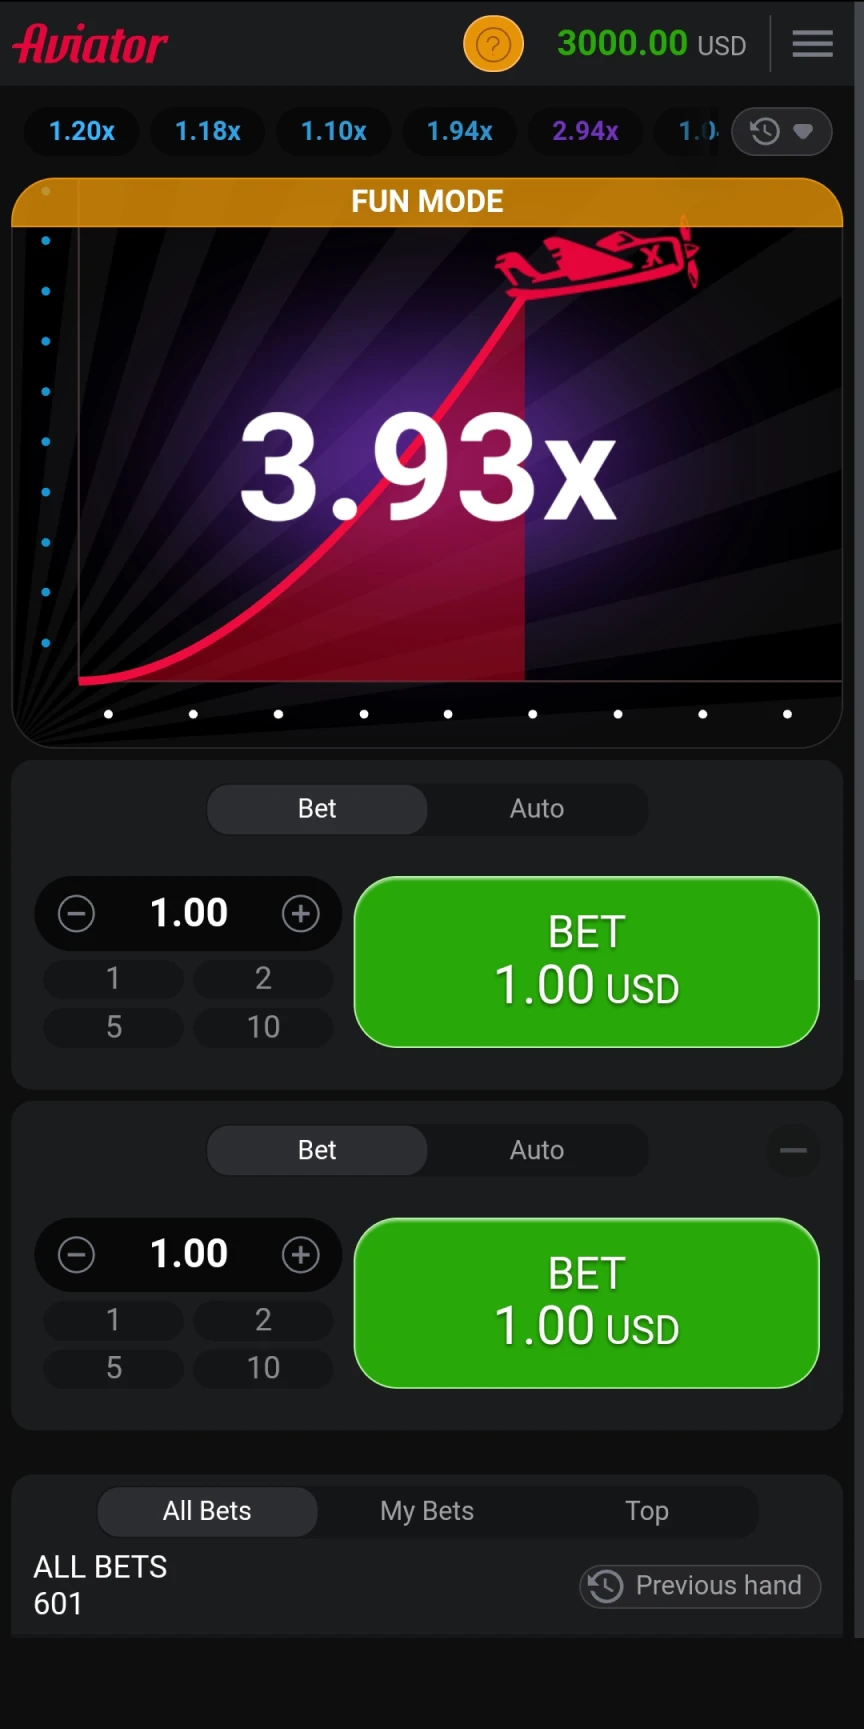 Now you can play Aviator in the 1xbet application for iOS.